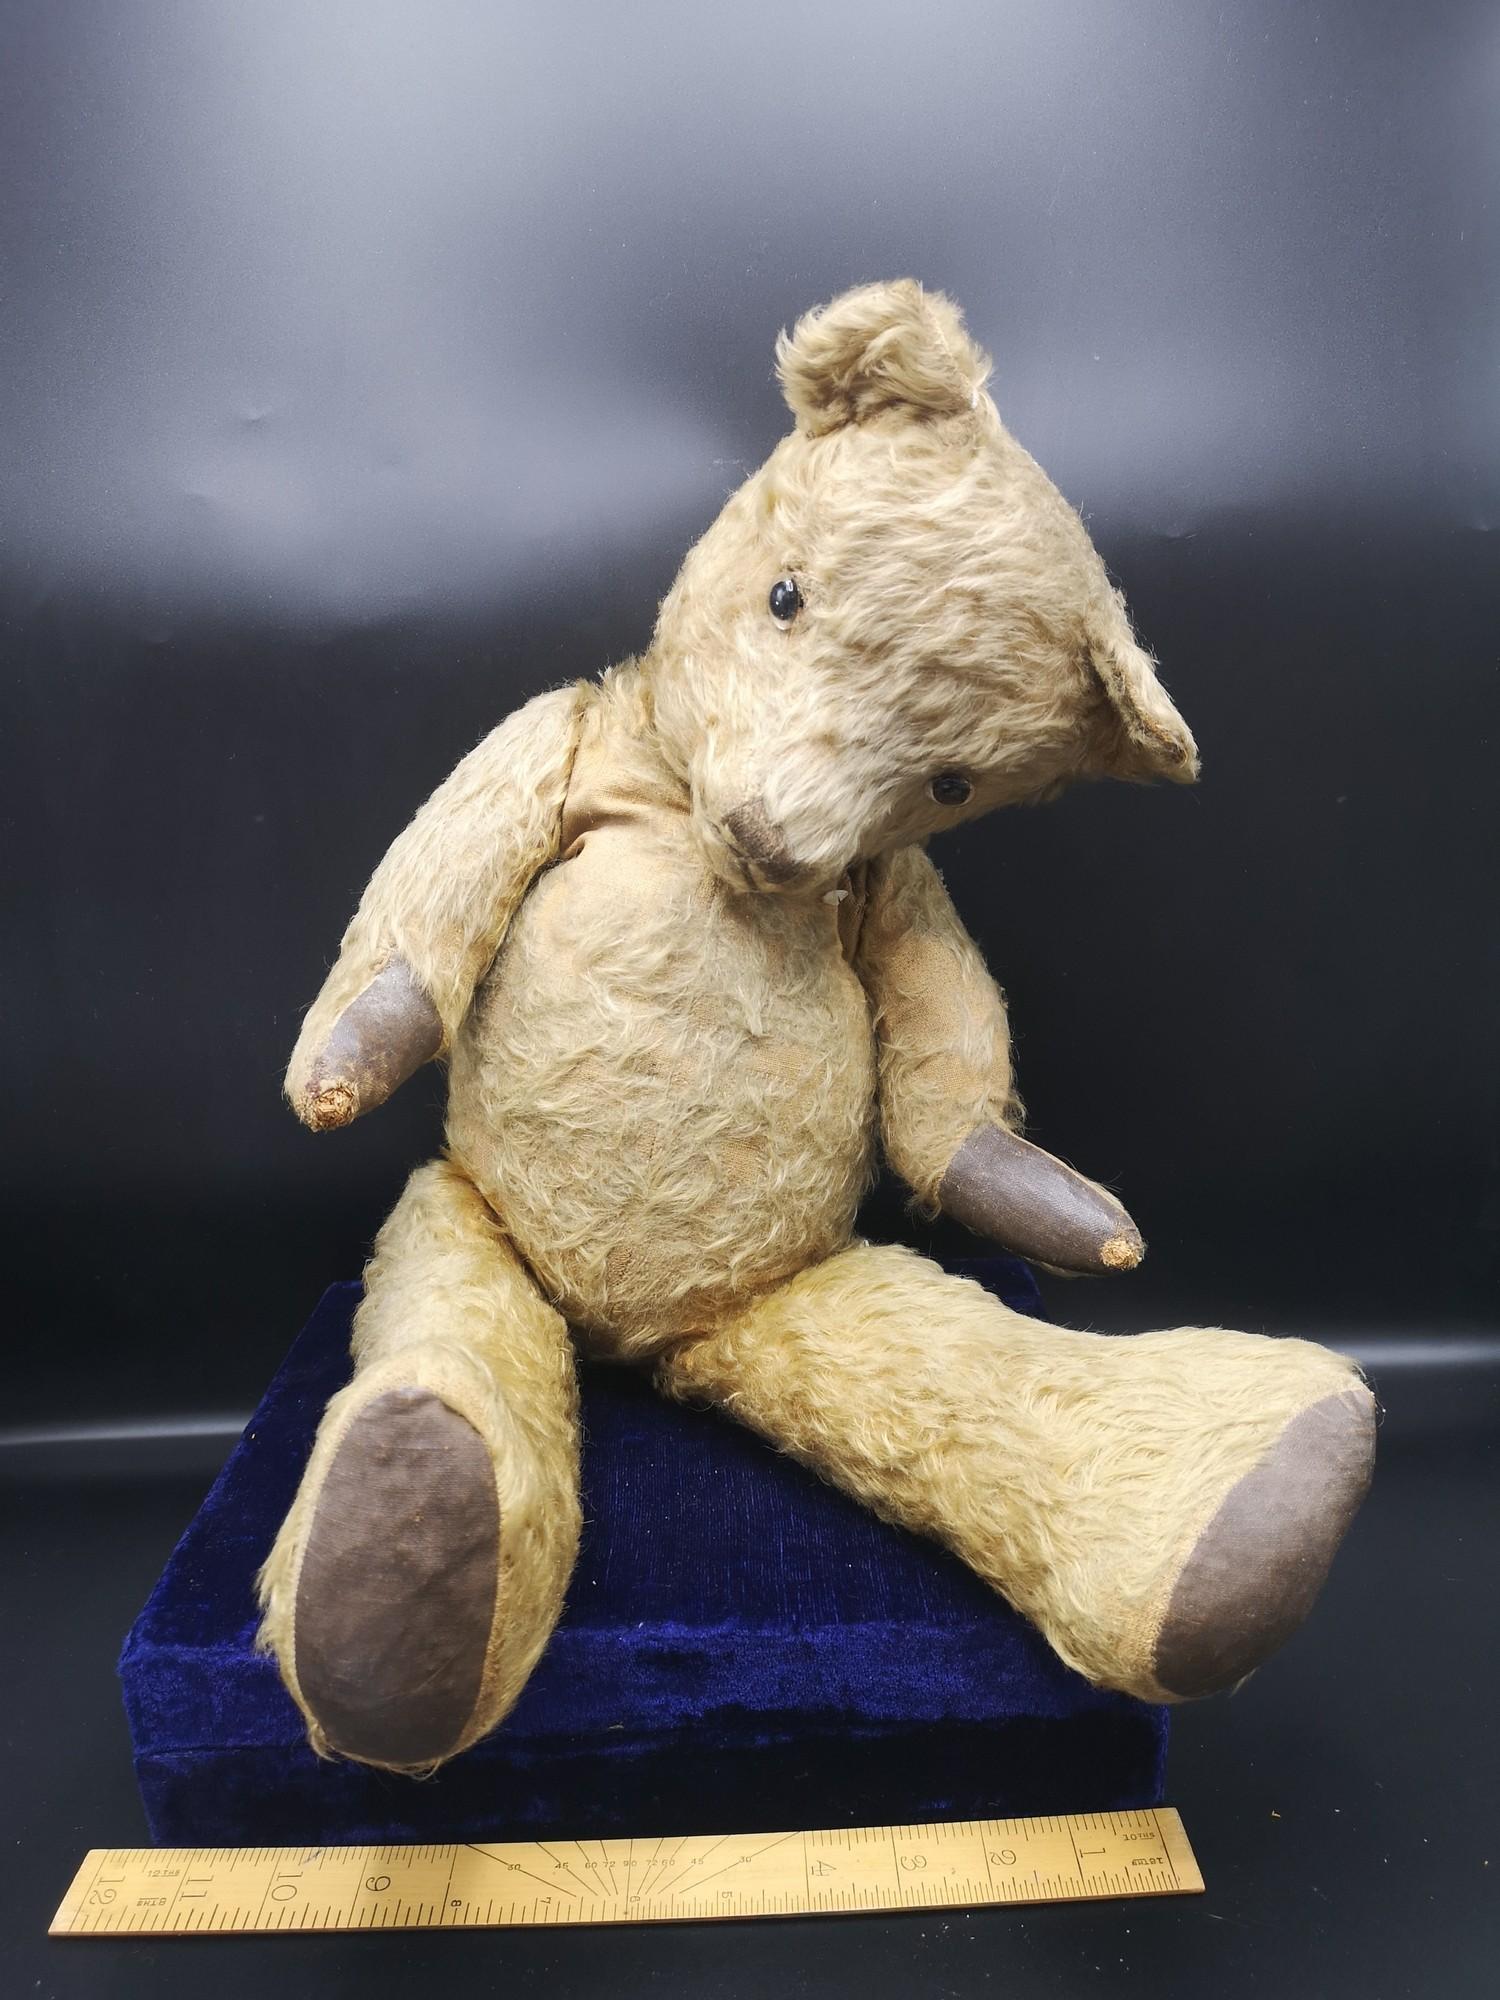 Antique Teddy with jointed limbs and hump back and glass eyes.